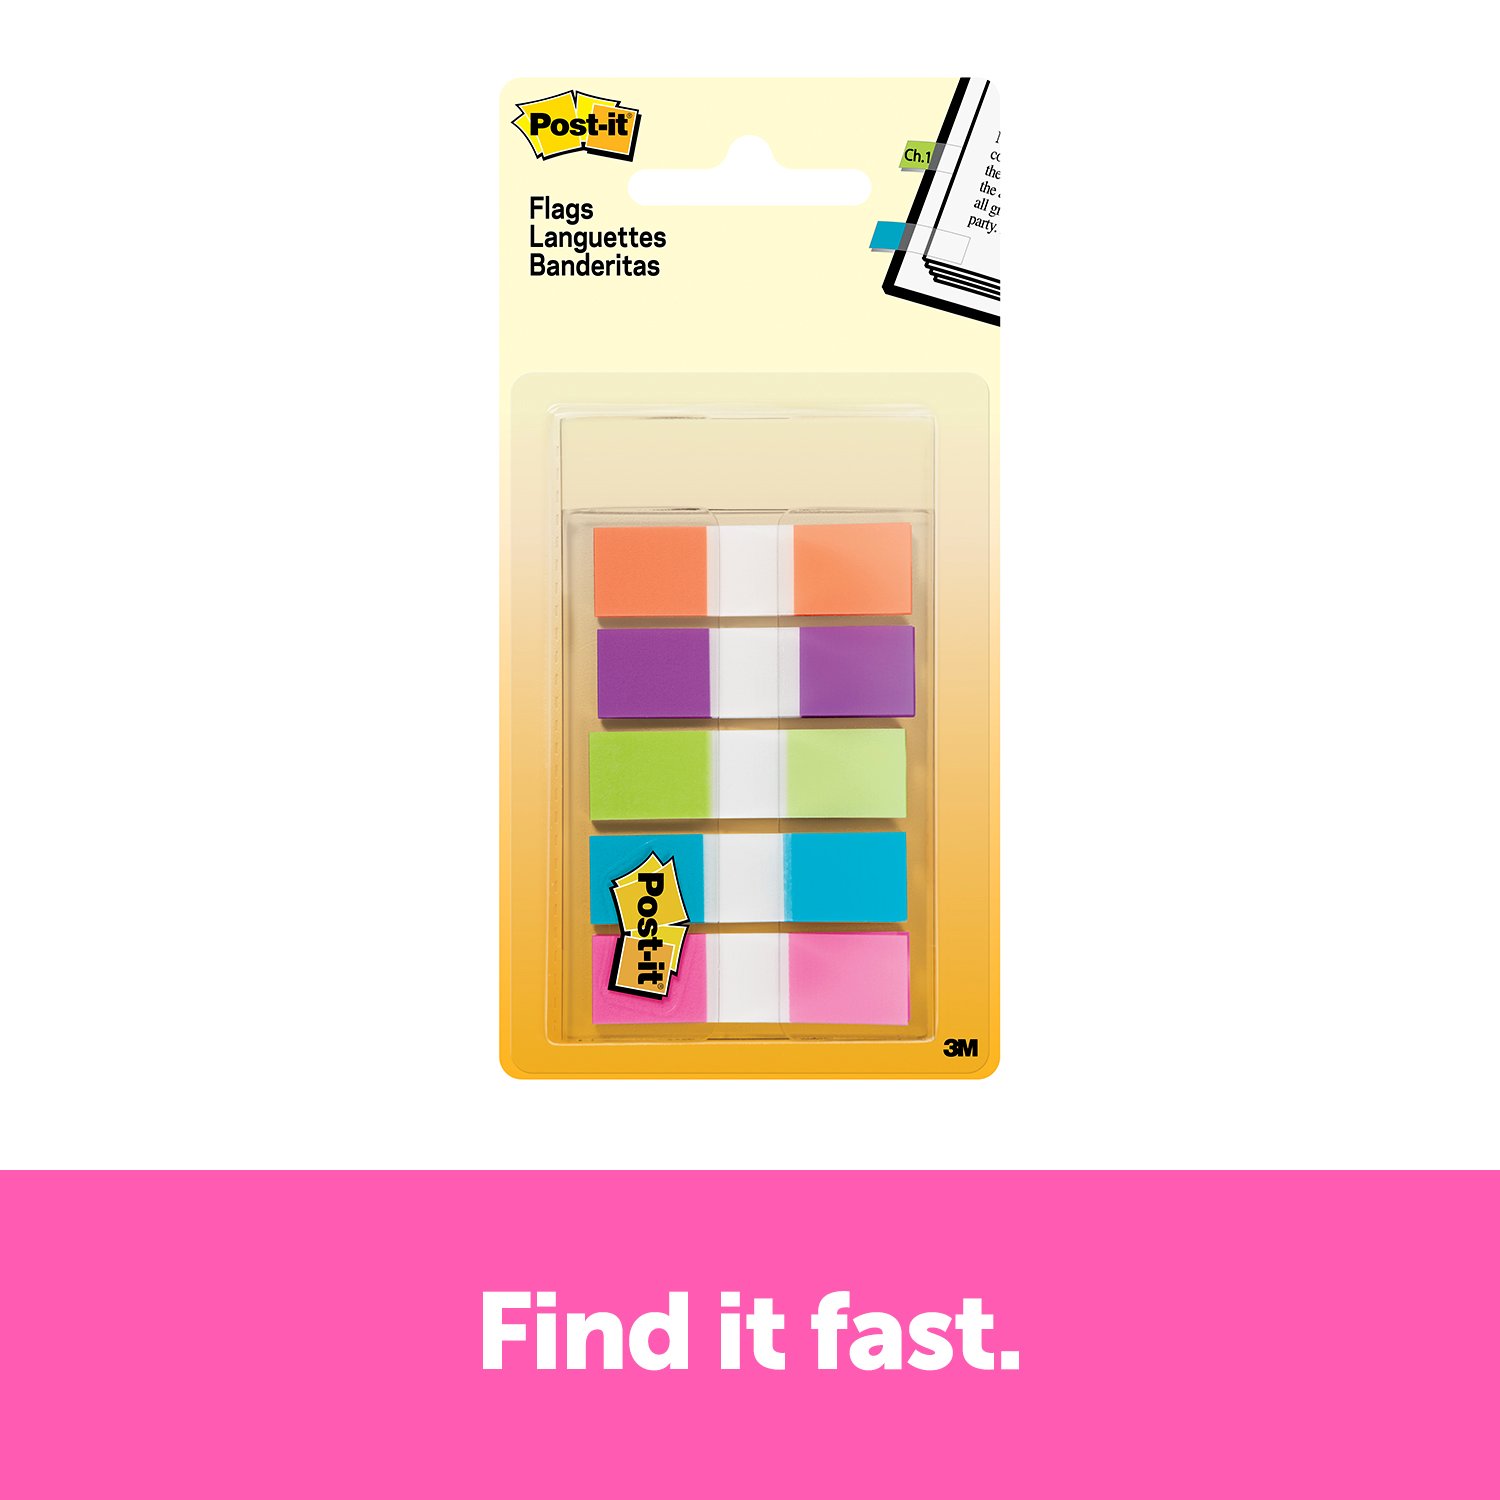 7100083515 - Post-it Flags 683-5CB2, 5 Colors, 0.47 In X 1.7 in, 6 Pack/Carton, 4 Carton/Case